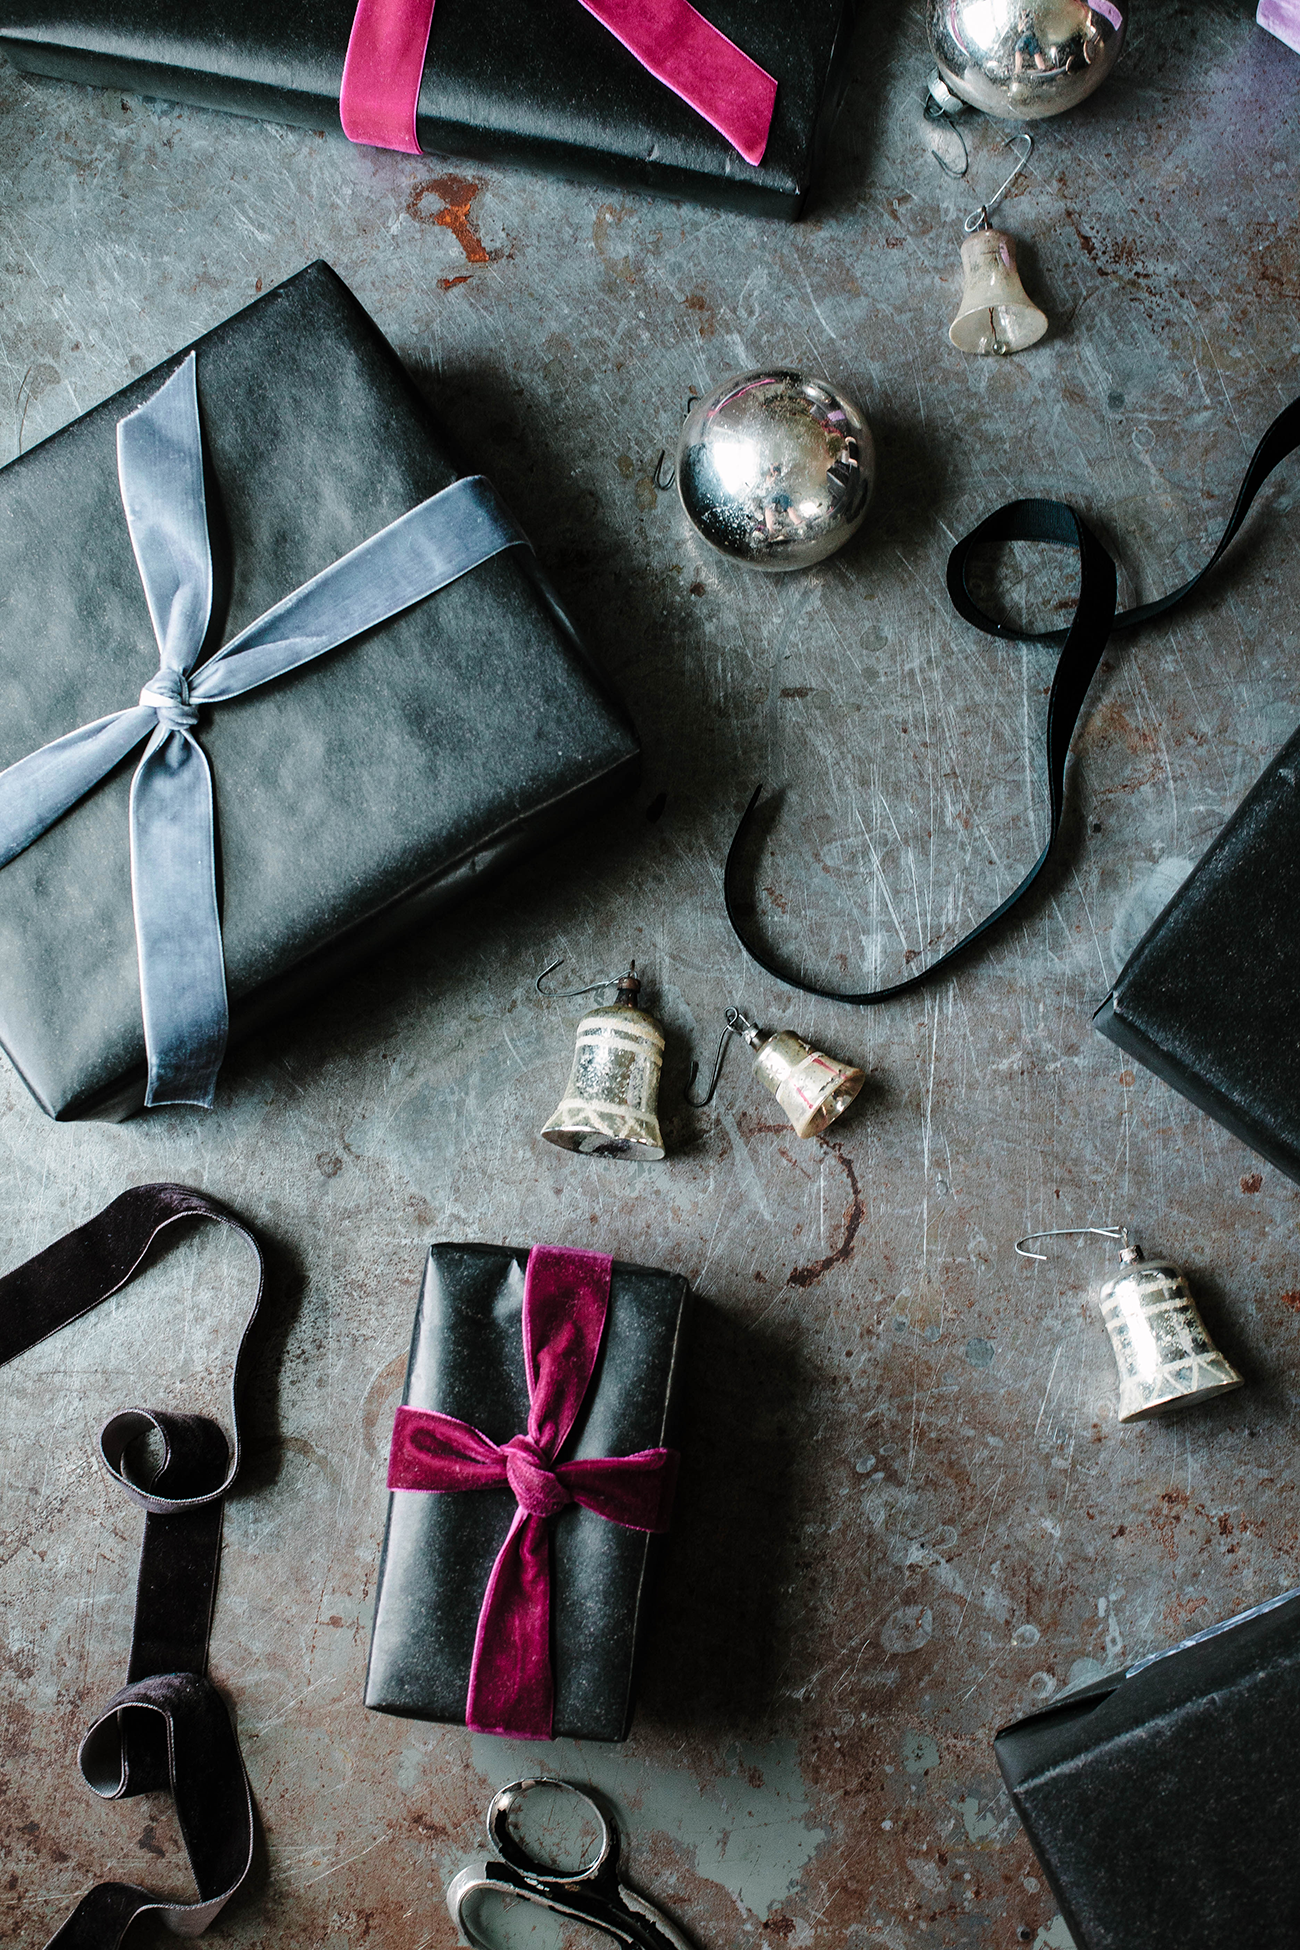 Christmas gift wrap ideas with cardboard and green velvet ribbon